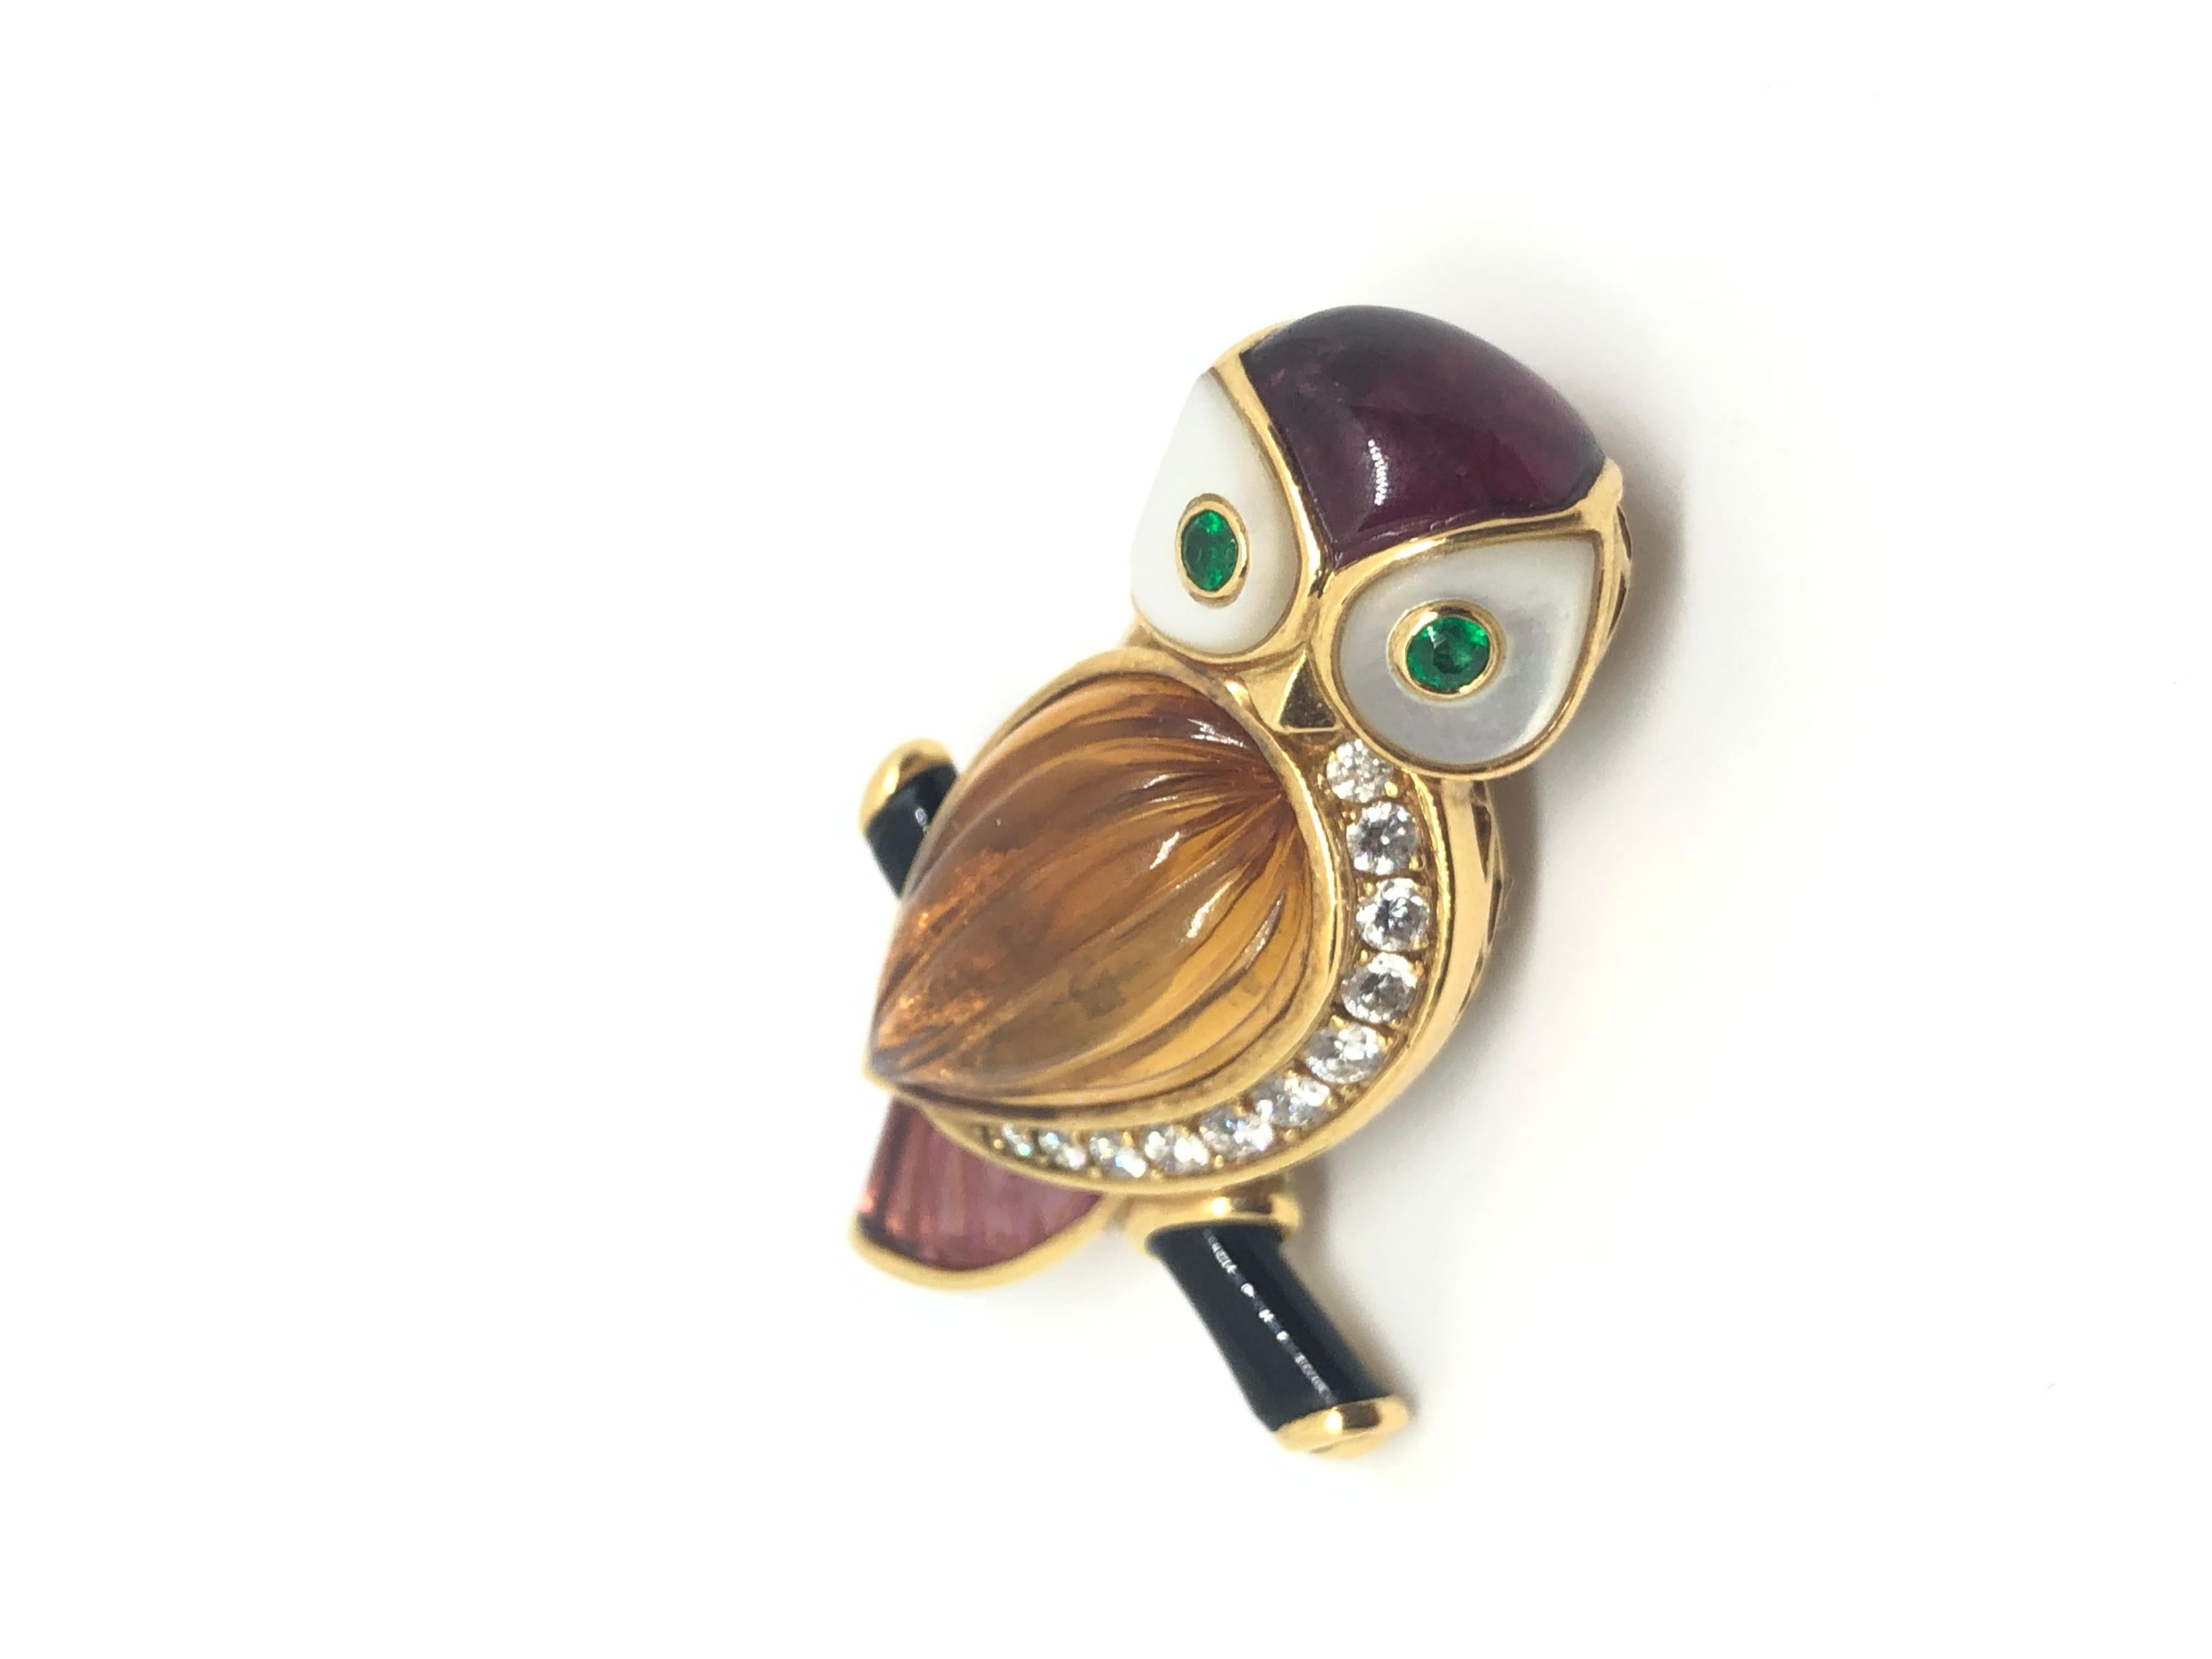 Stunning Van Cleef & Arpels Brooch features a shape of a vibrant owl bird crafted in 18k Yellow, features and set with brilliant cut round diamonds, cabuchon rubelite, citrine and tourmaline. Stamped with VCA make’s mark, a hallmark for 18k gold and